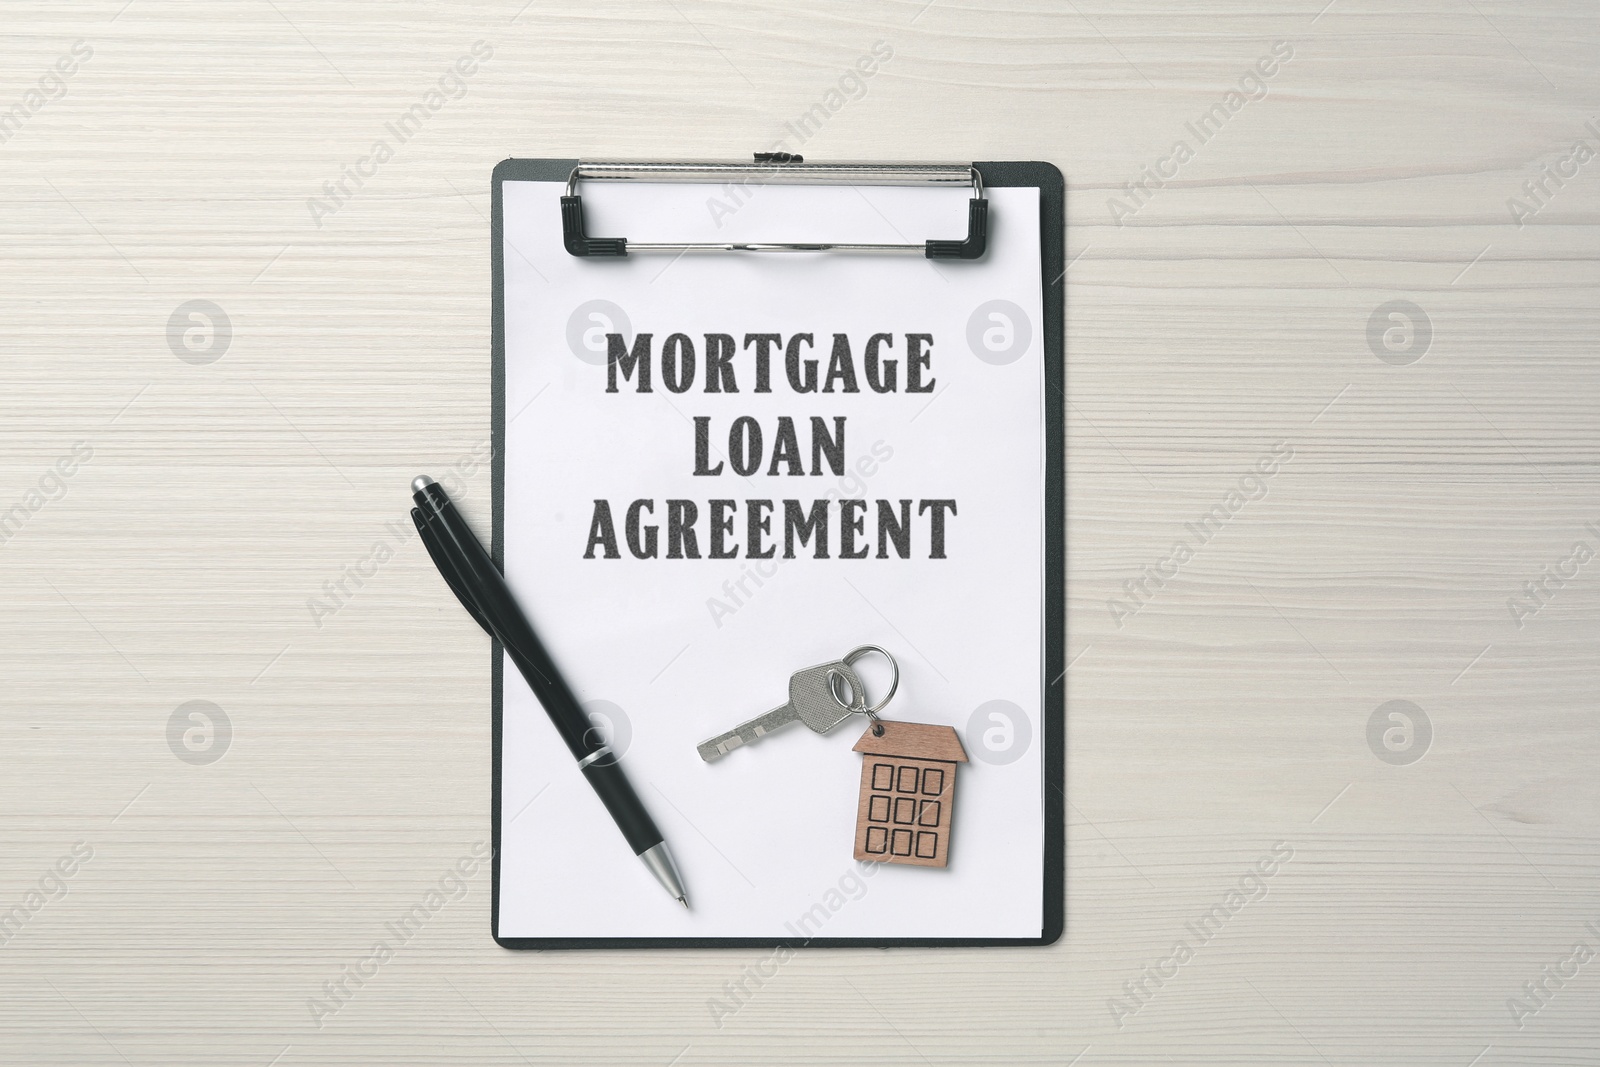 Image of Mortgage loan agreement, house key and pen on white wooden table, top view